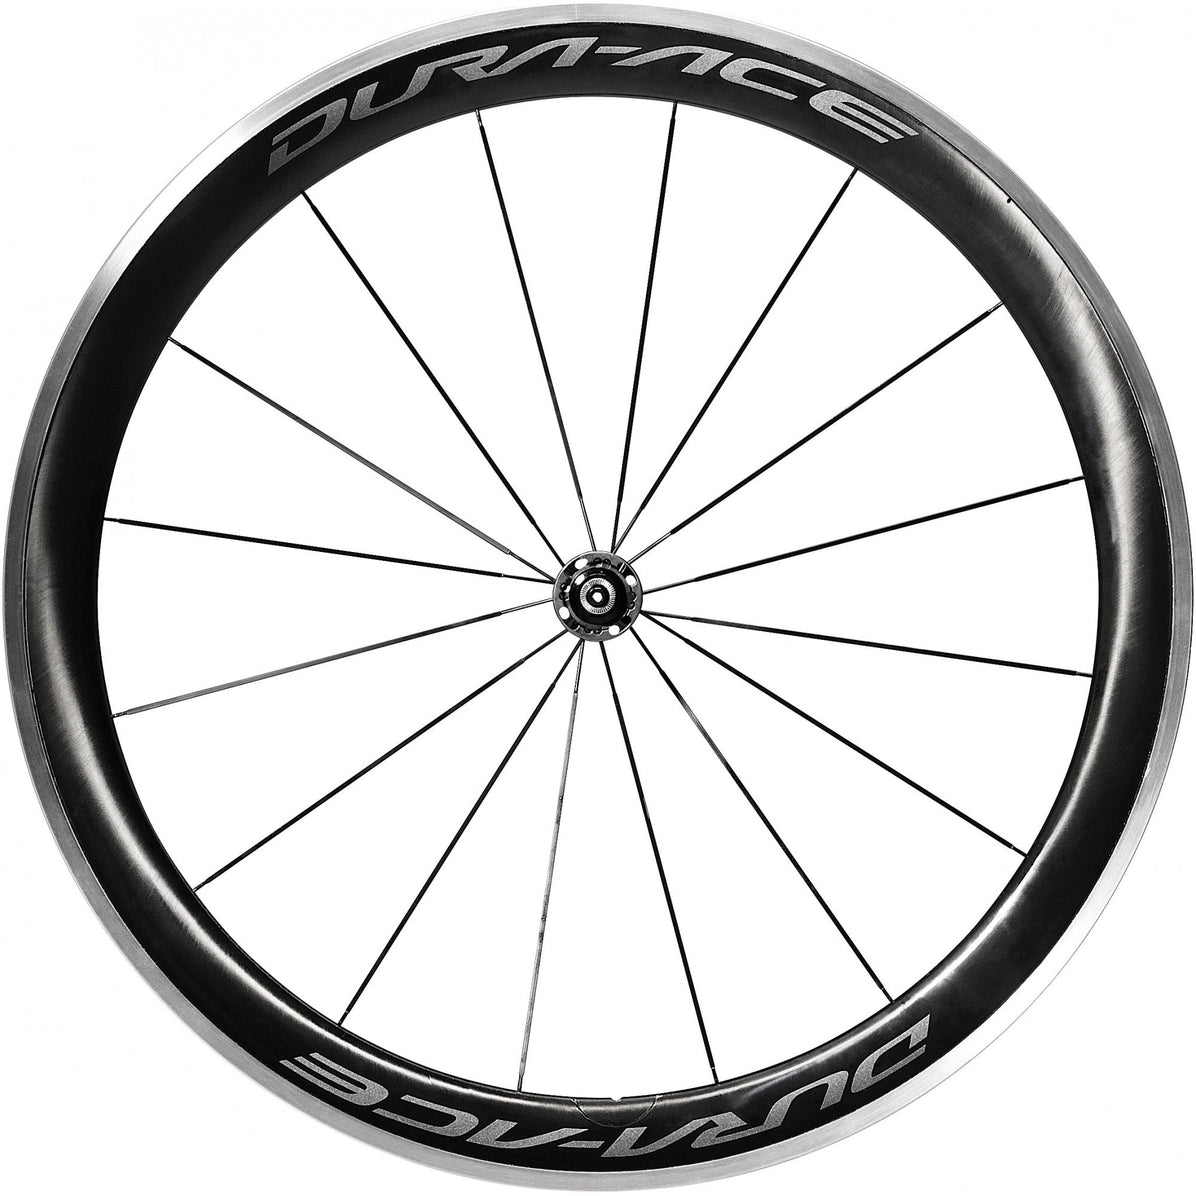 Shimano WH-9100 C60 Dura Ace Carbon Wheels - Clincher